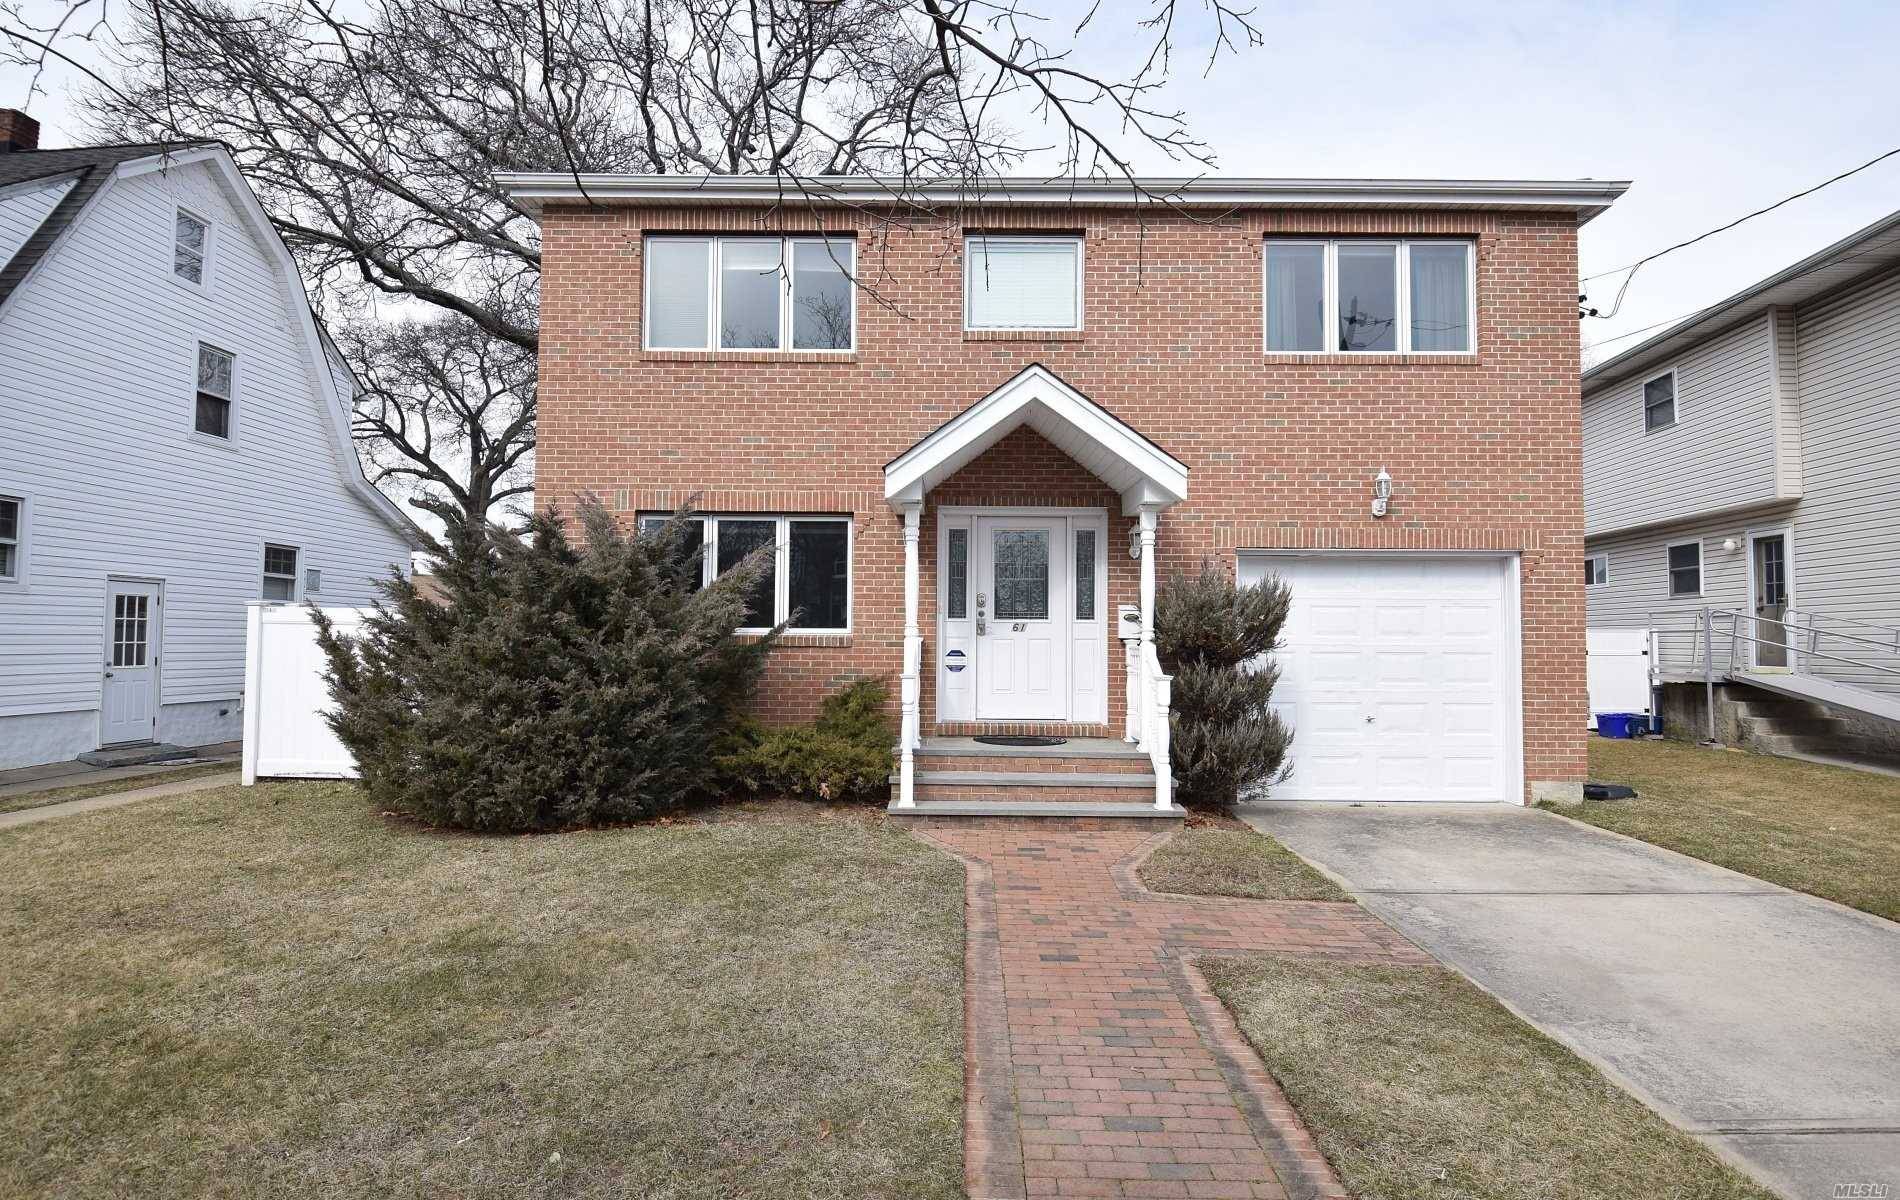 2005 Colonial on an Oversized Property, Mint Condition, Beautifully Renovated, 5 Bdrs, 2.